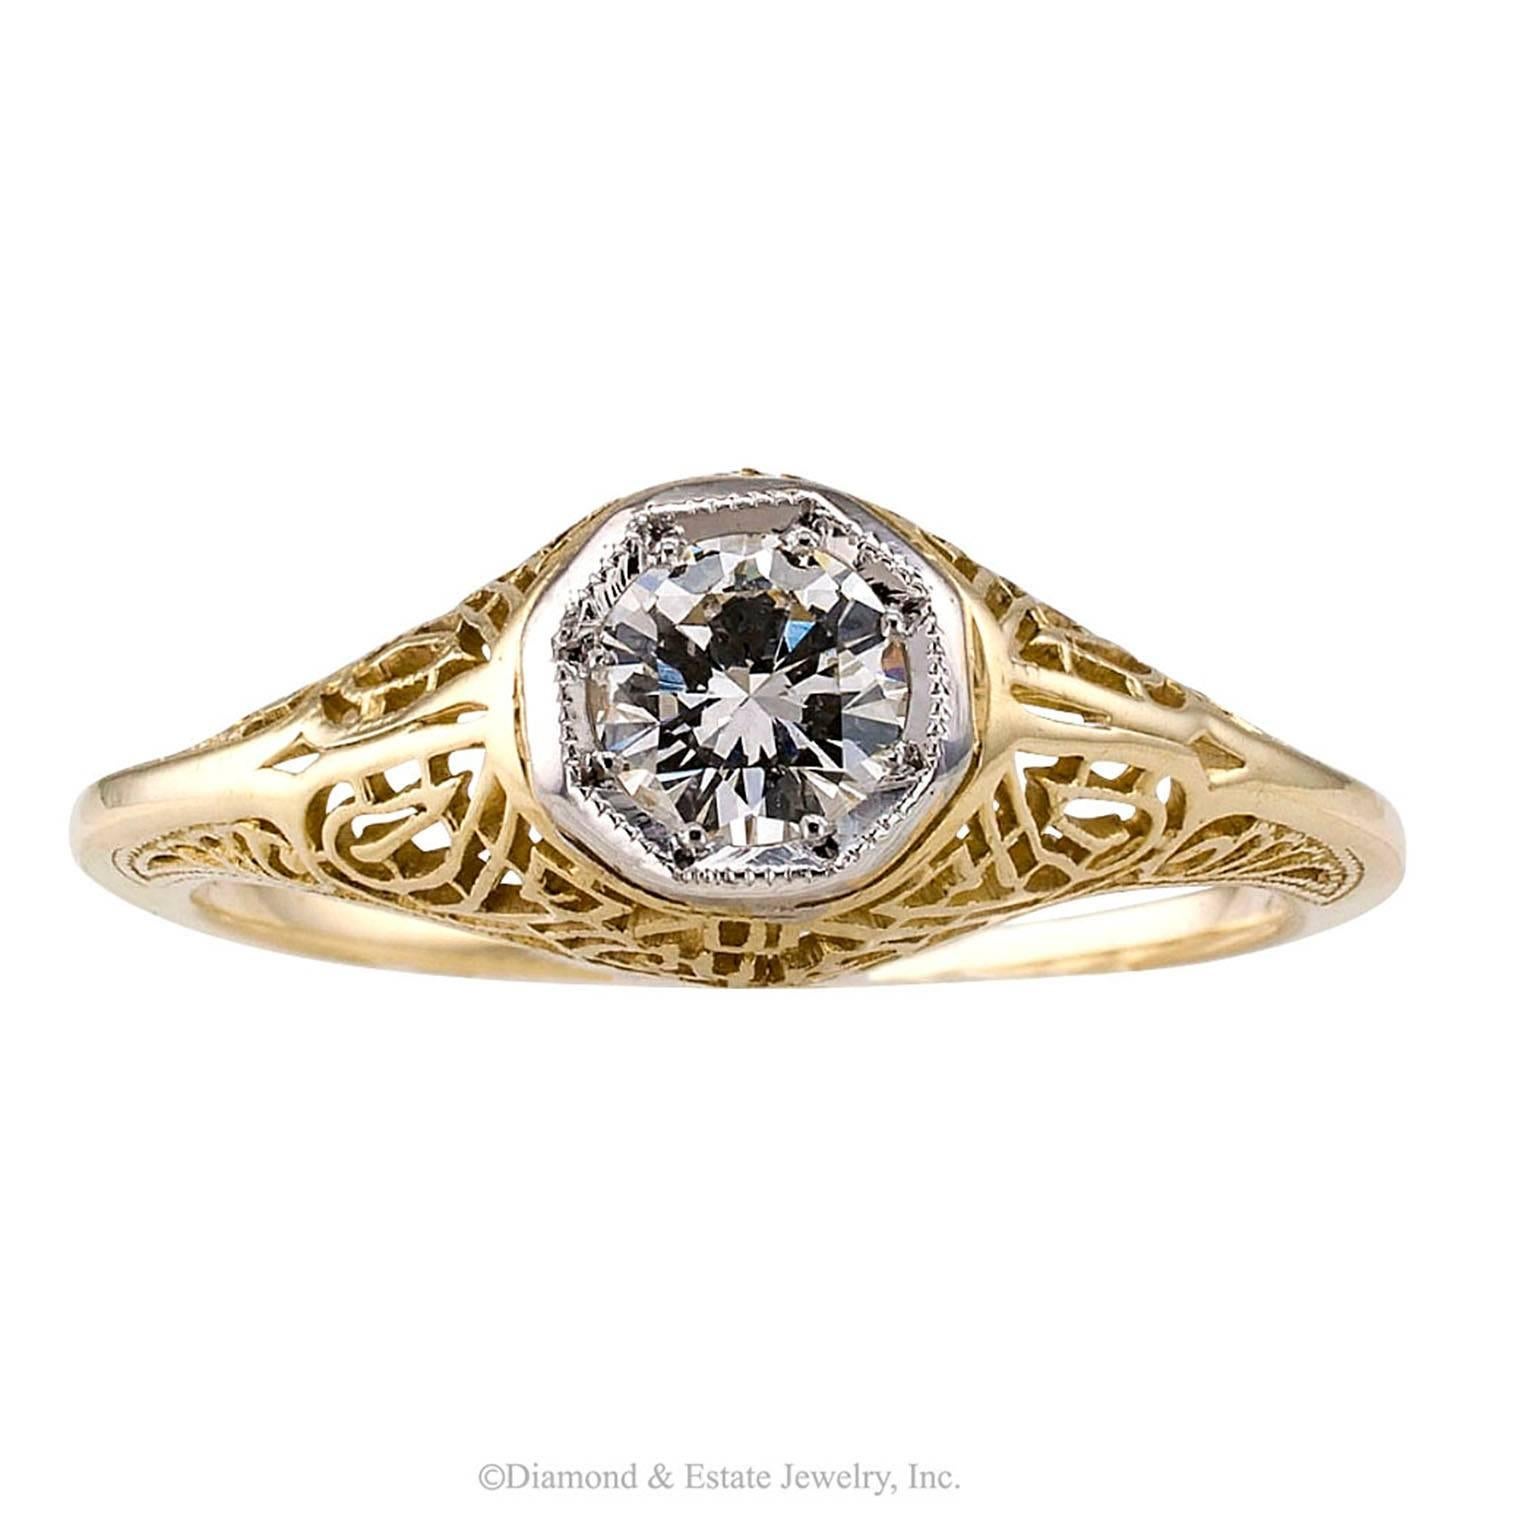 Art Deco 1930s 0.33 Carat Gold Diamond Engagement Ring

Art Deco 1930s 0.33 carat diamond solitaire  yellow gold ring.  Lavishly decorated with fine filigree work, this authentic Art Deco diamond engagement ring centers upon a transitional-cut